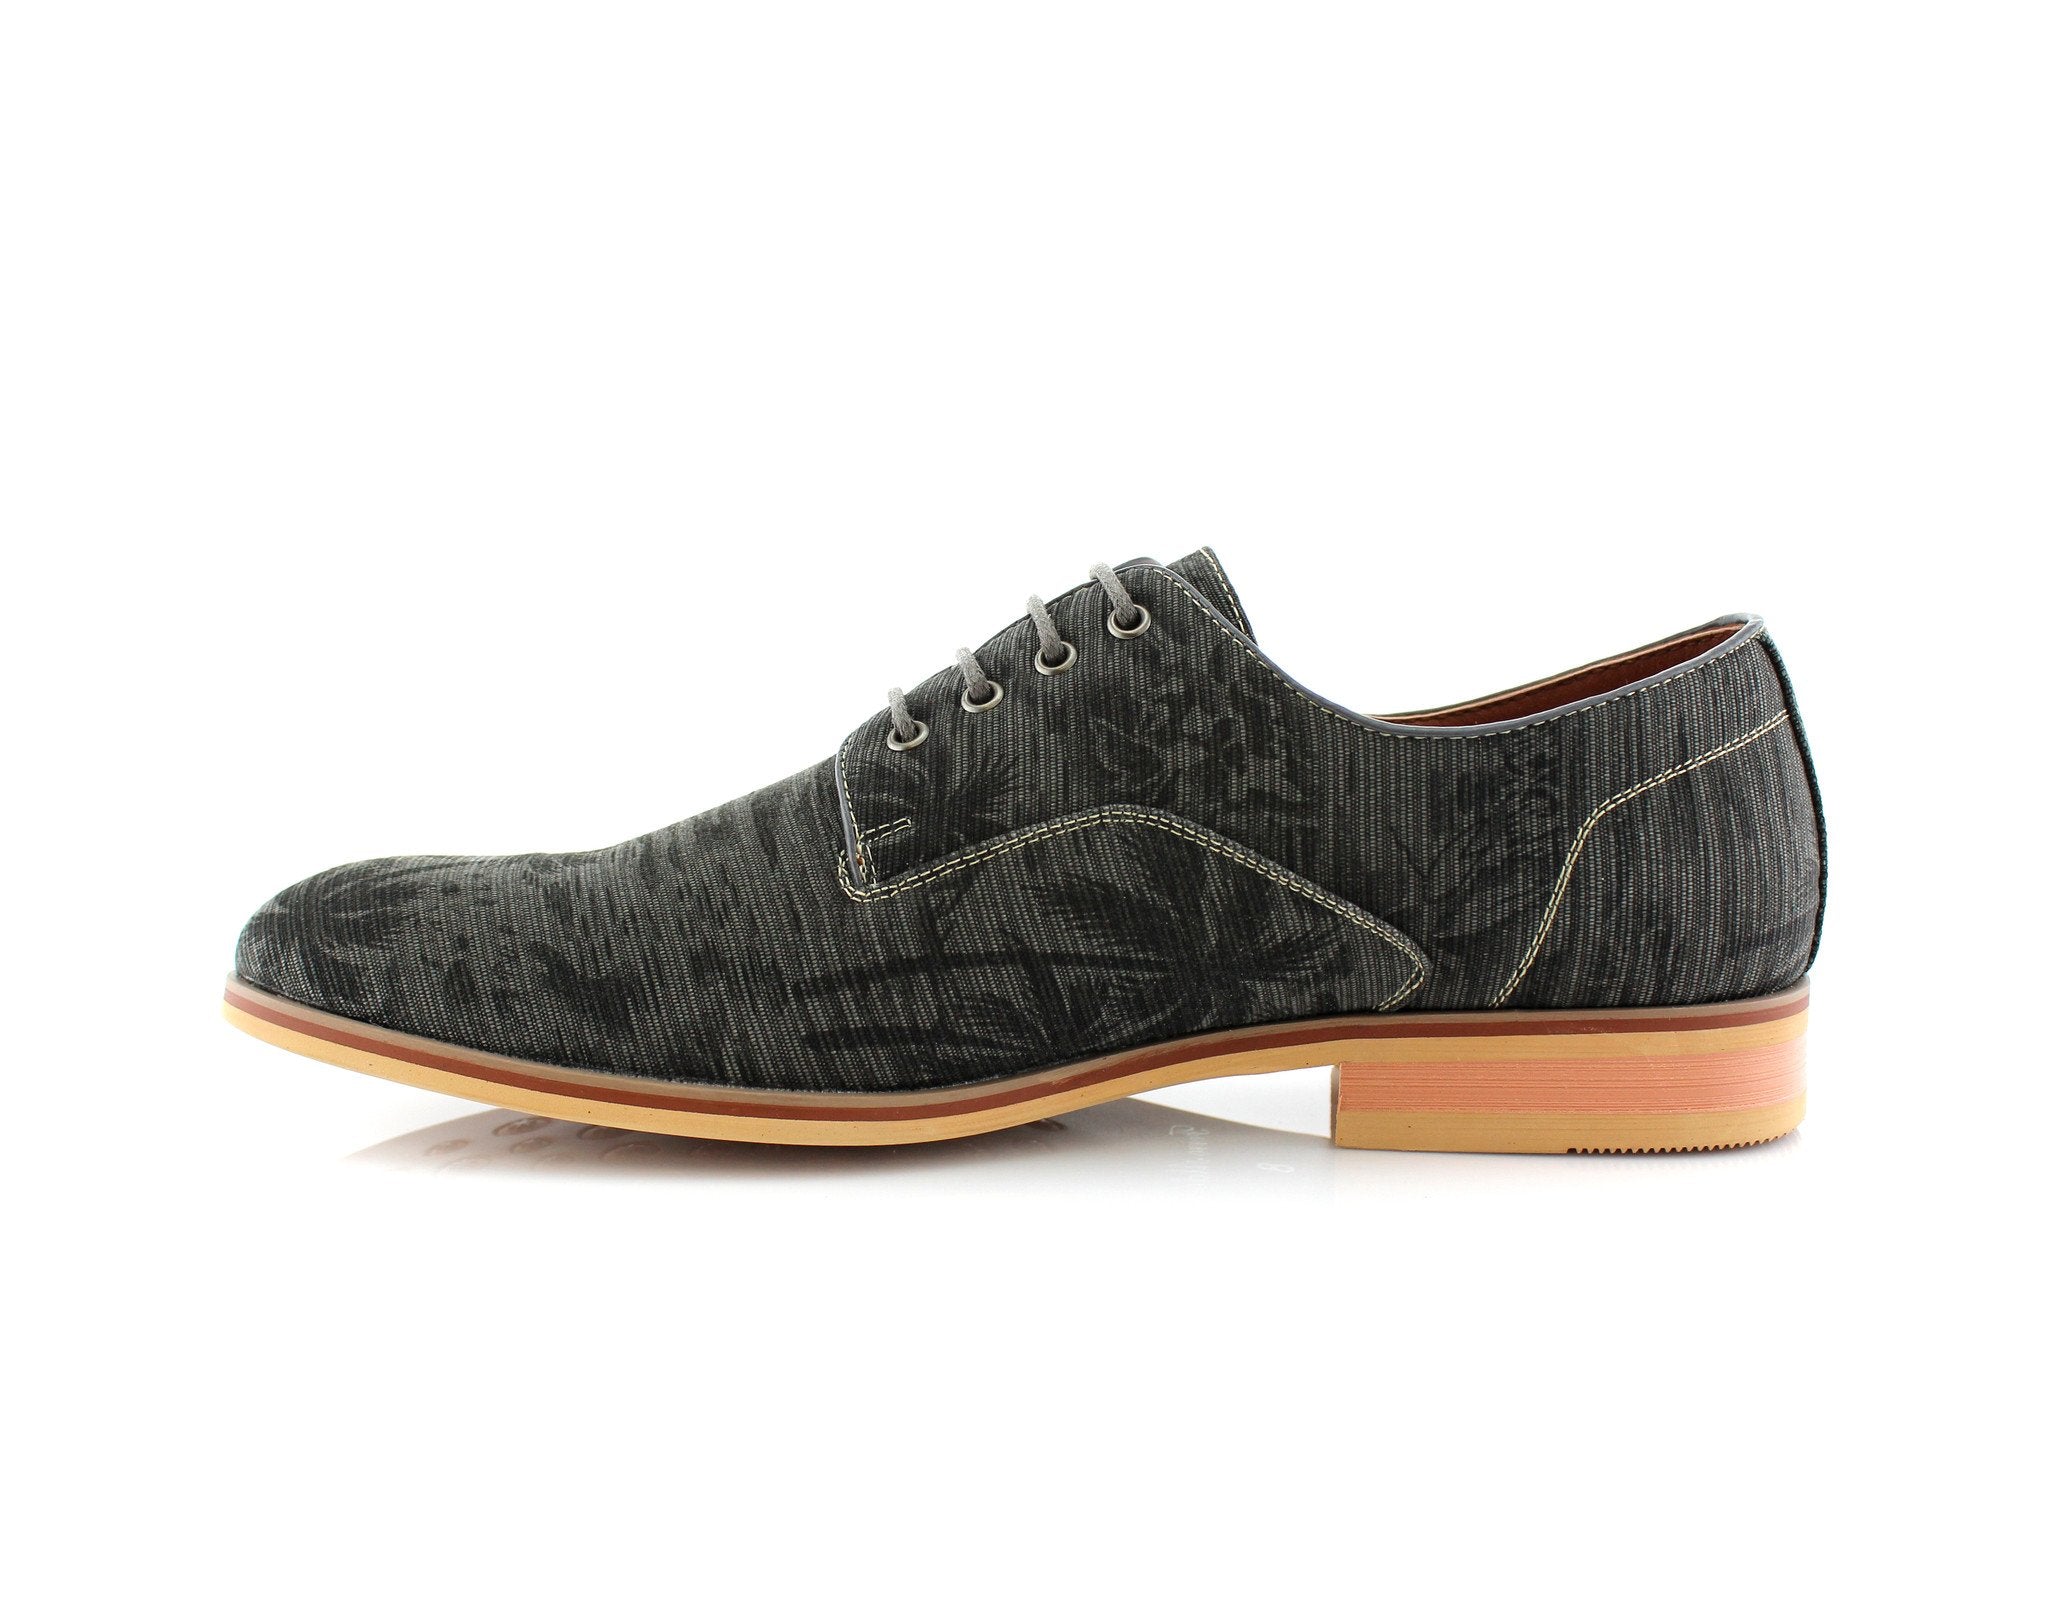 Palm Tree Print Derby Shoes | Paco by Ferro Aldo | Conal Footwear | Inner Side Angle View